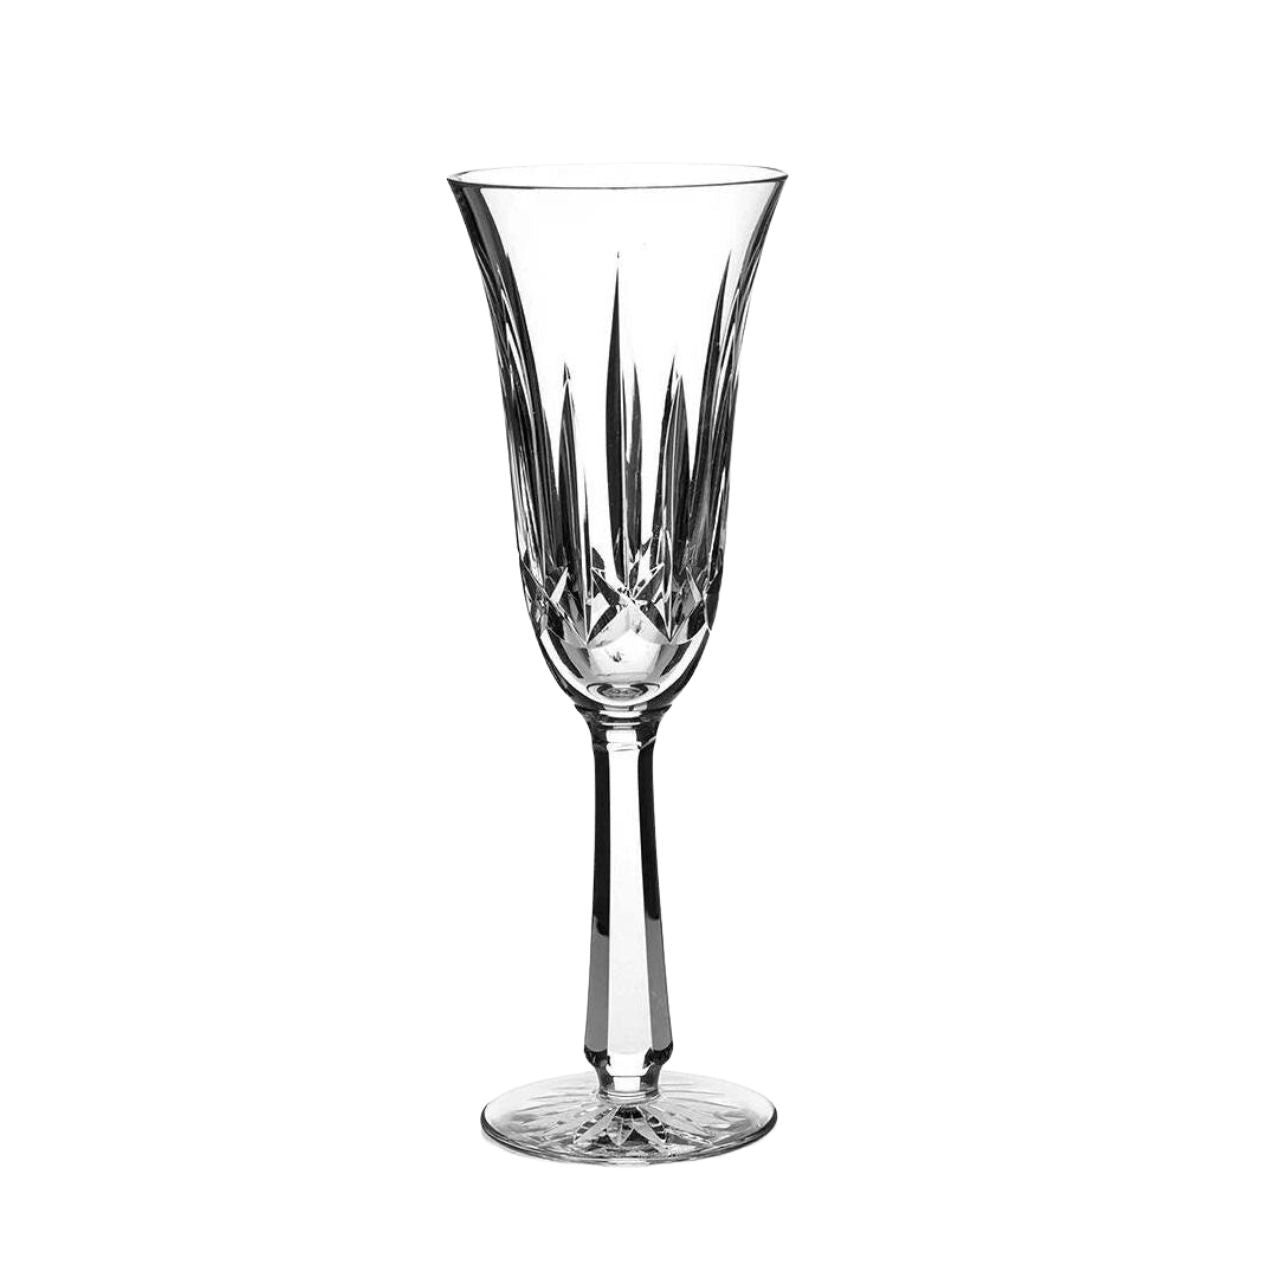 Waterford Crystal Ballyshannon Flute Champagne  The Waterford Ballyshannon pattern is a stunning combination of brilliance and clarity. Featuring a graceful, extended stem, the Ballyshannon Champagne Flute is designed to enhance the aesthetics of sparkling wine and champagne cocktails.